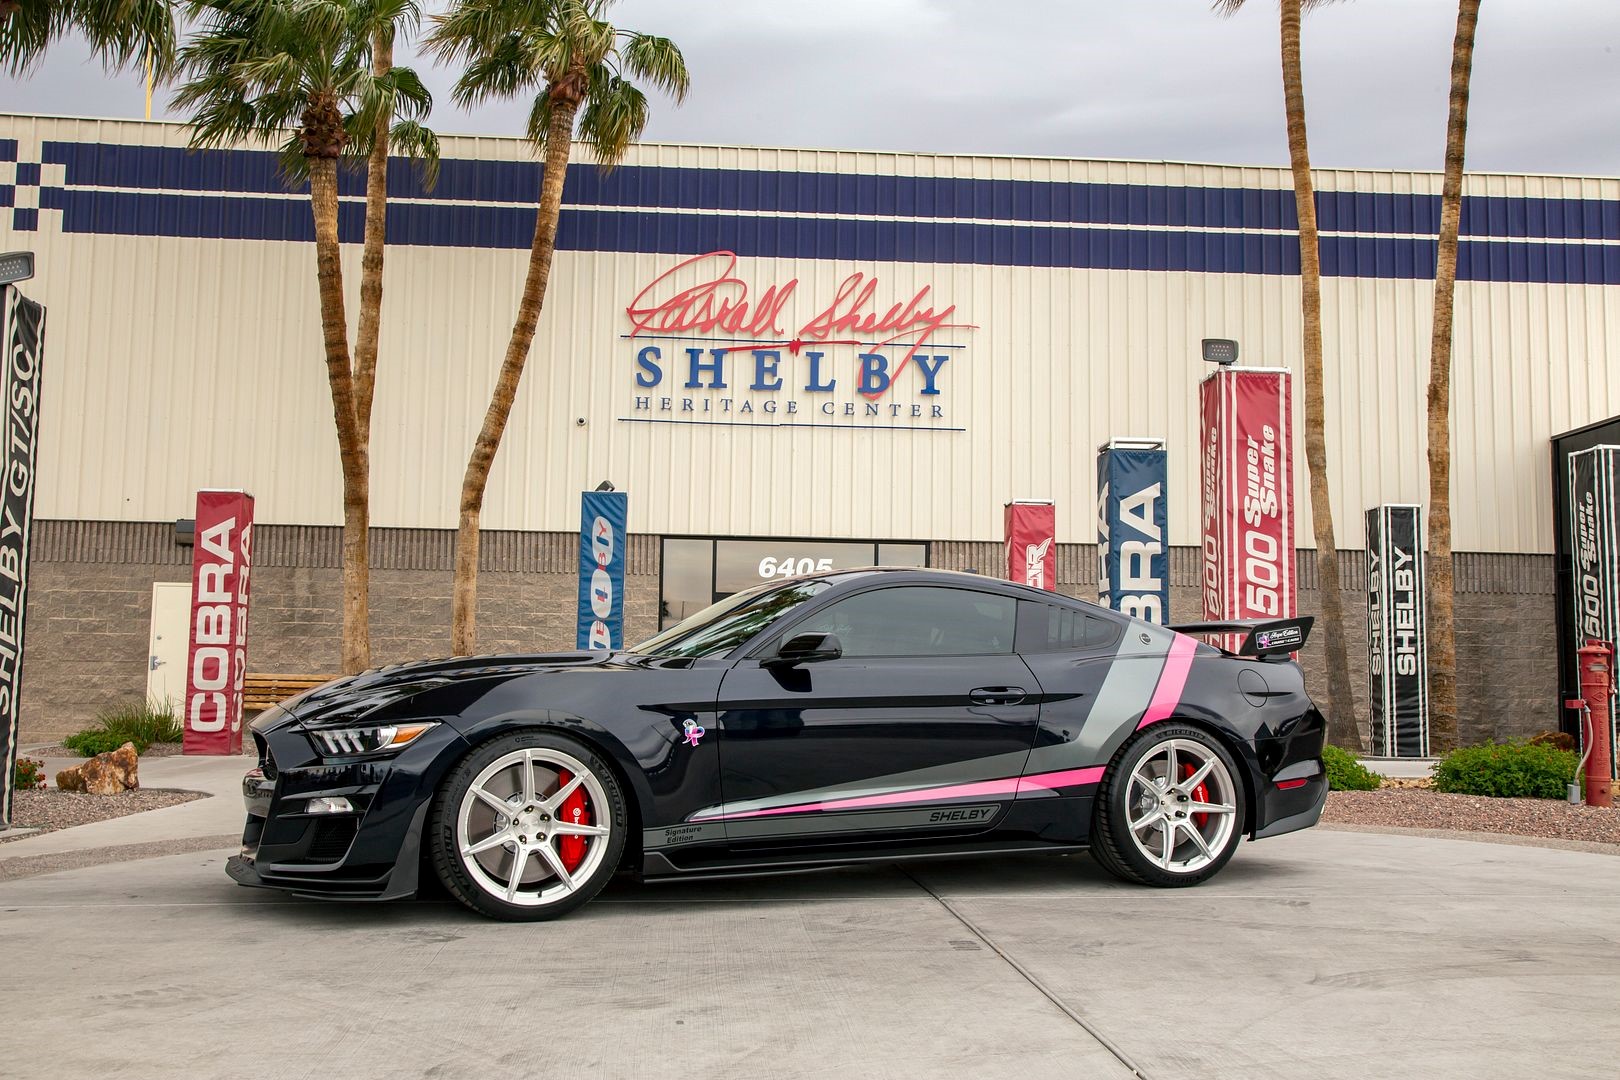 Shelby Builds GT500SE to Raise Awareness, Funds for Cancer Research | THE SHOP